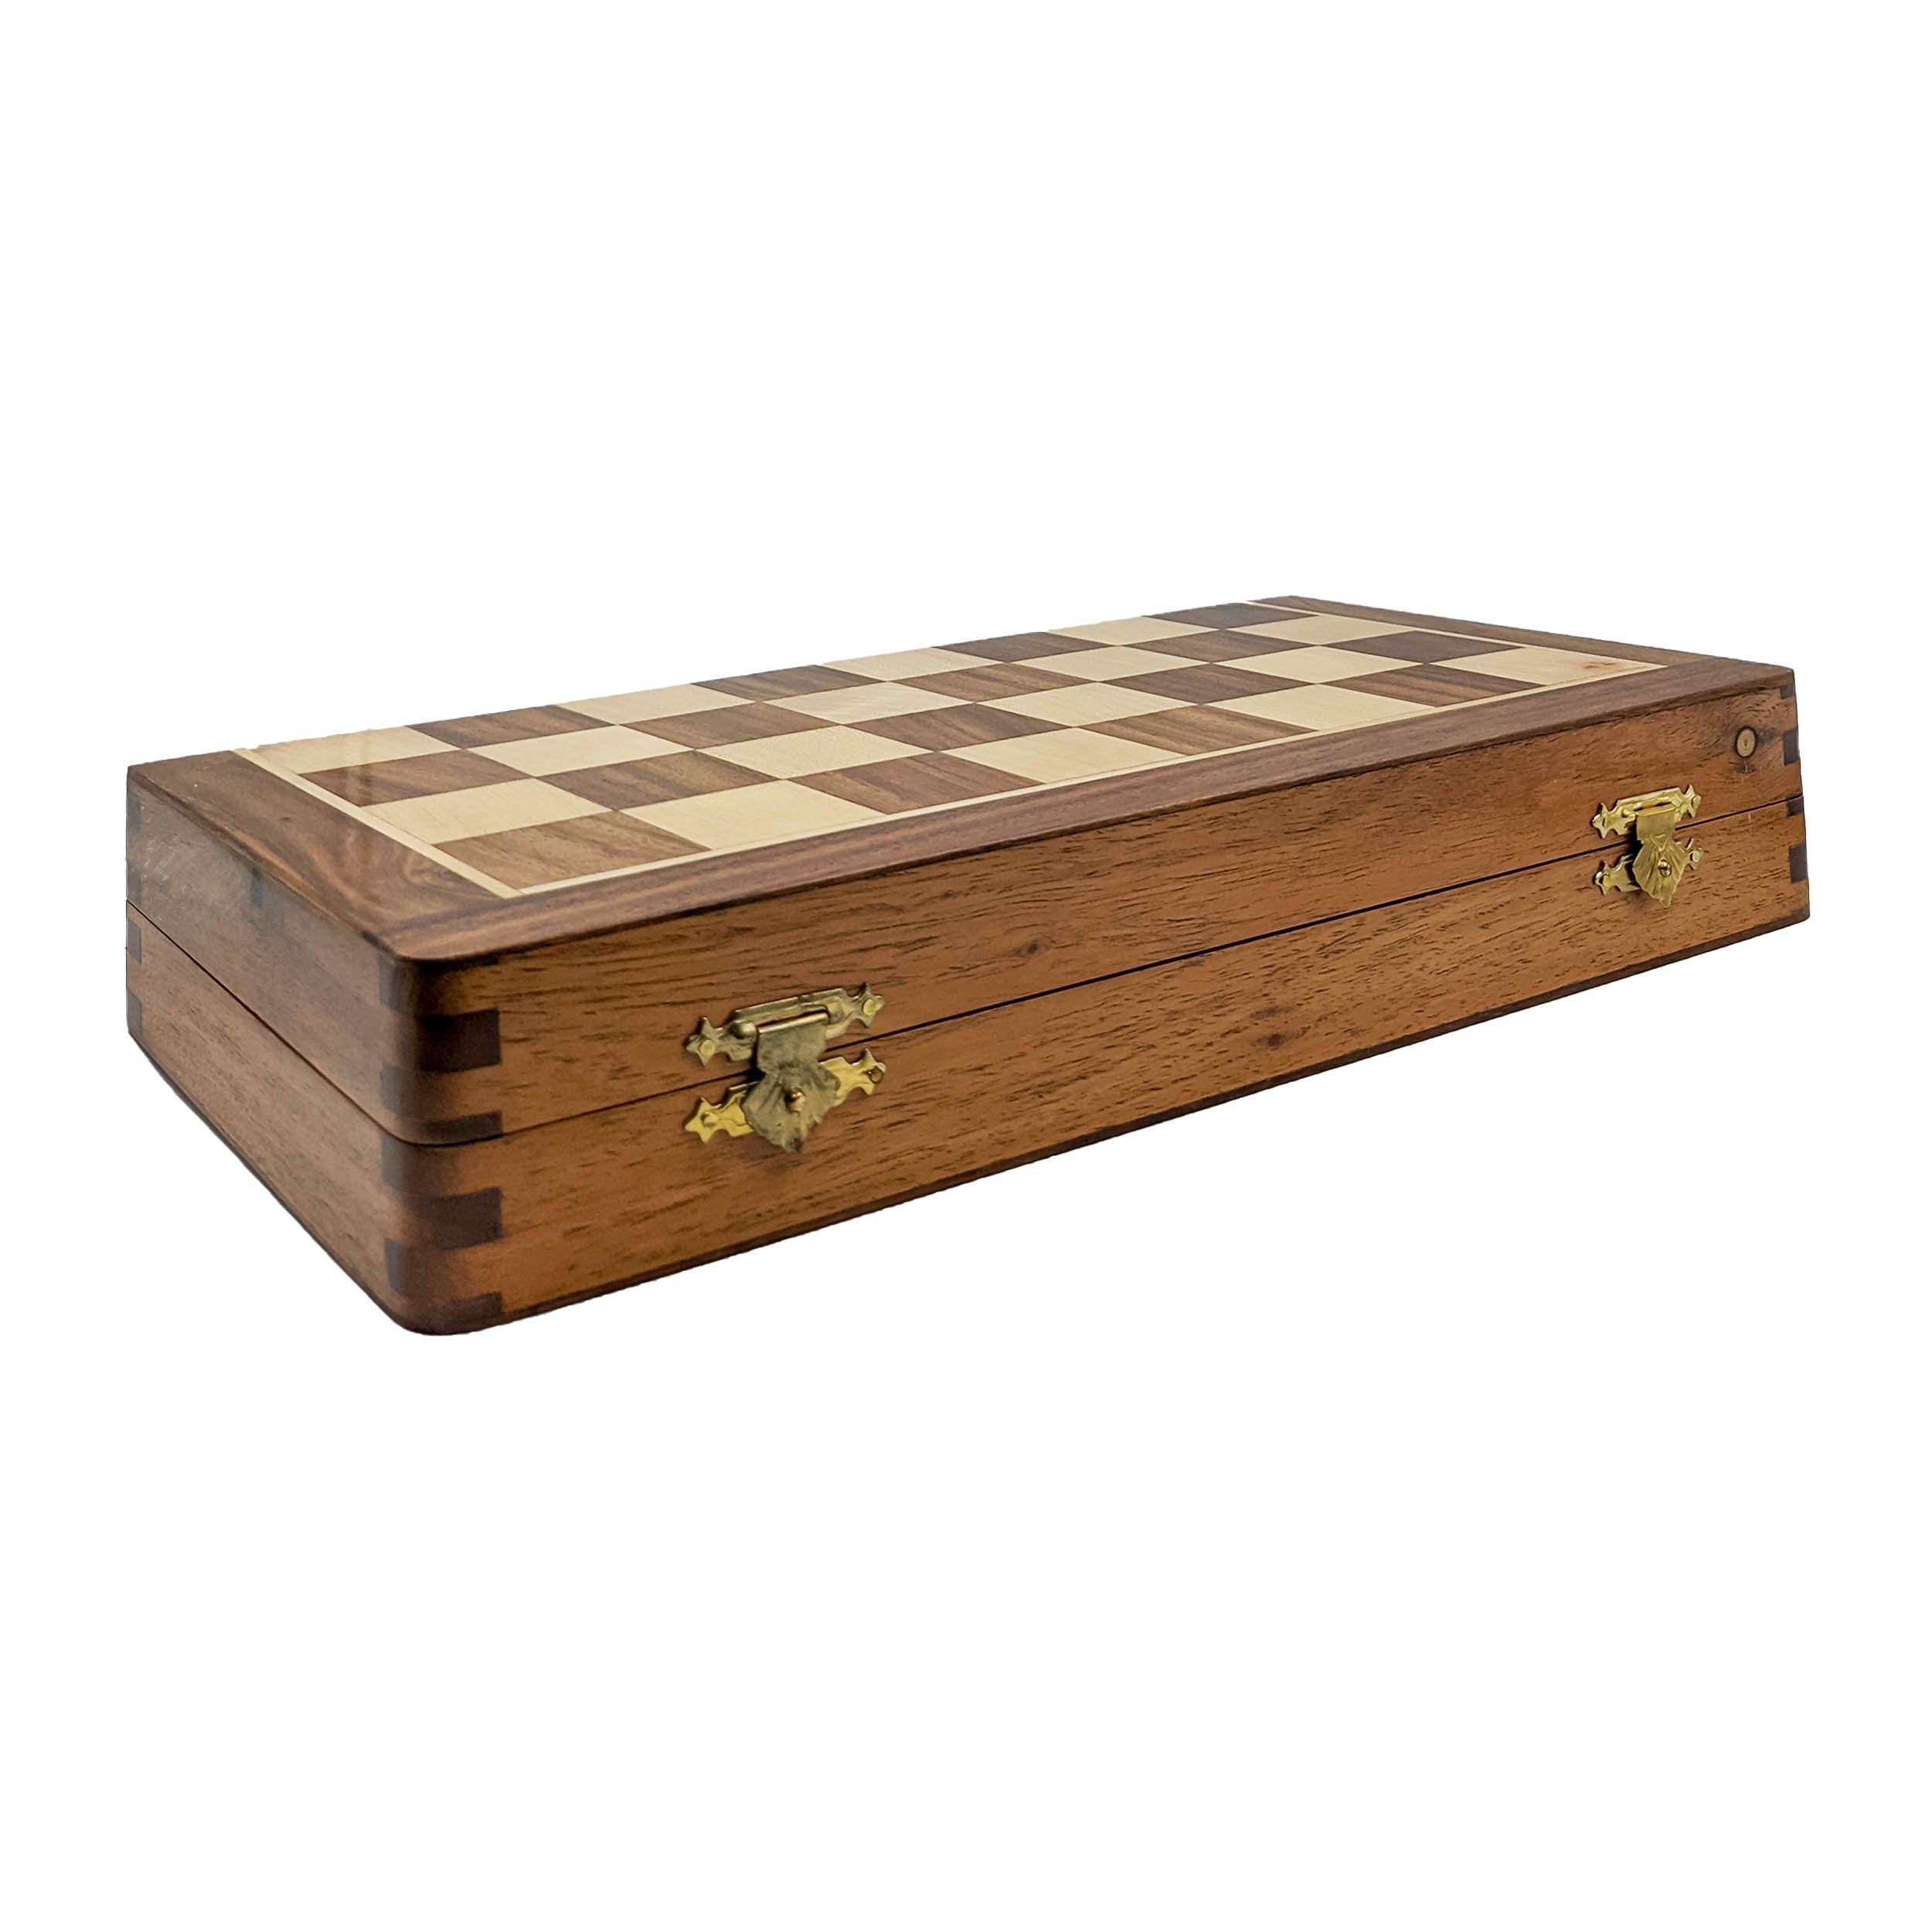 Handmade Folding Wooden Chess Board - Exquisite Design and Superior Quality